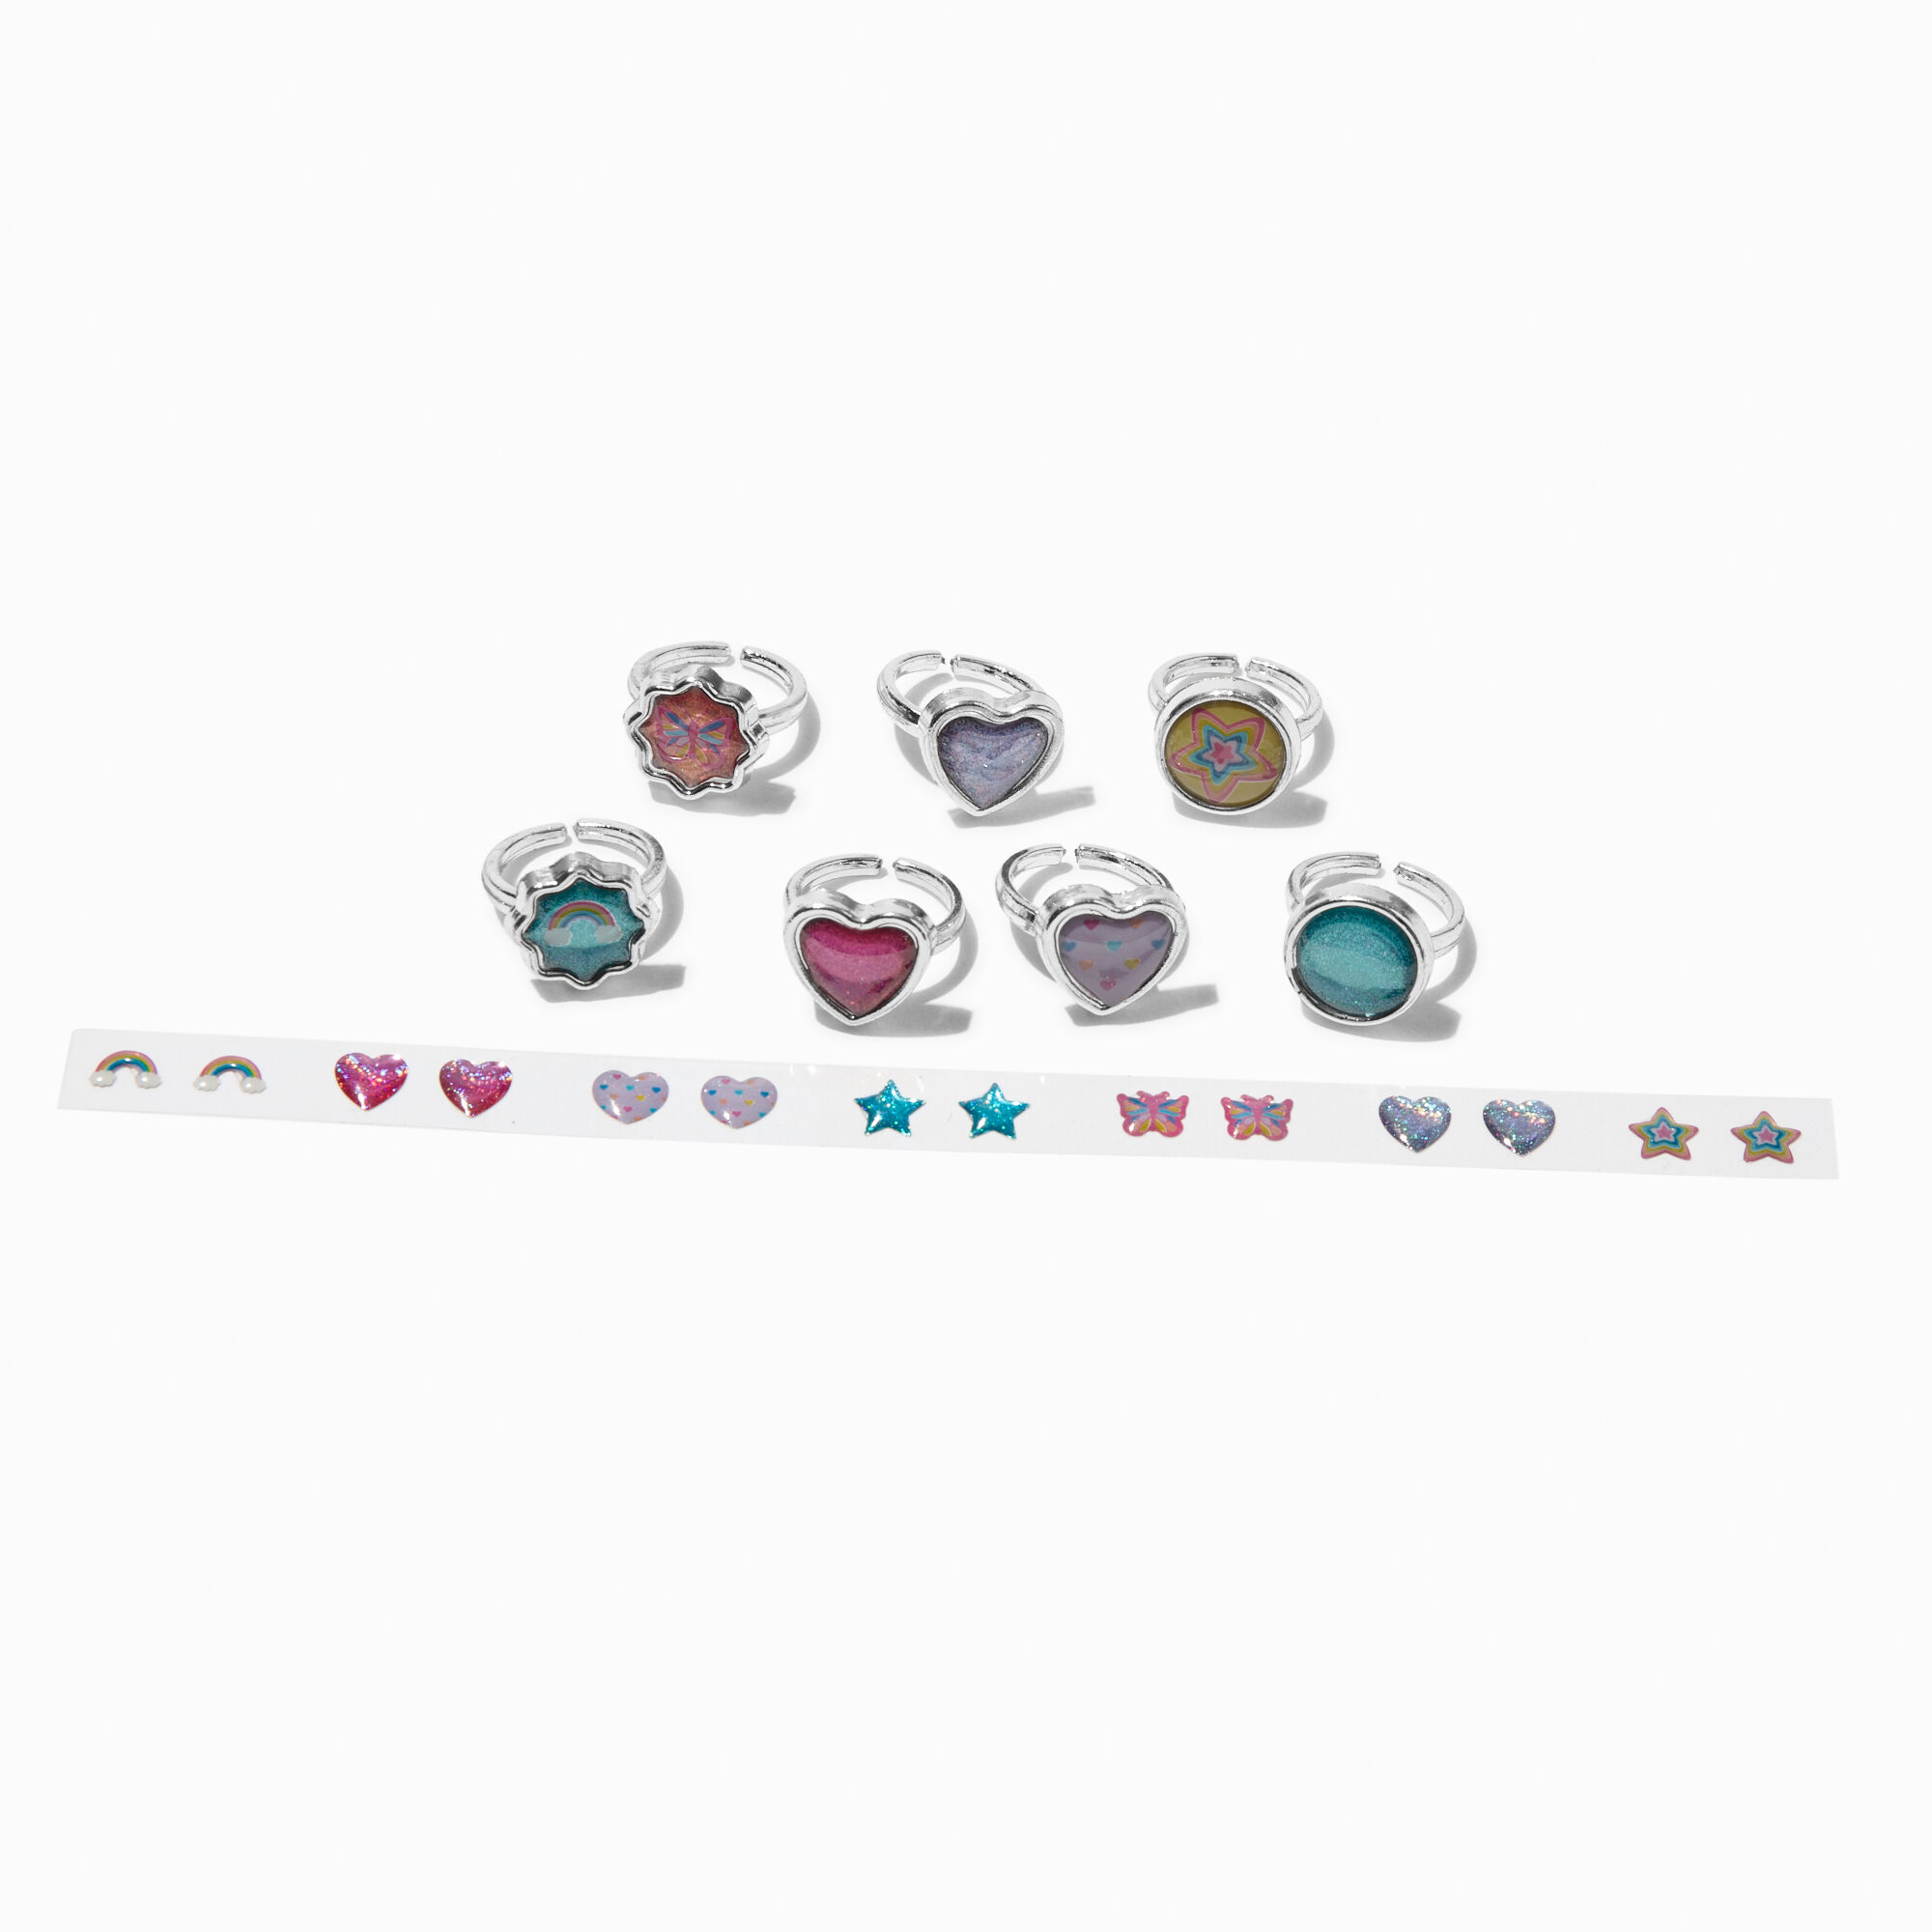 View Claires Club 7 Day Stick On Earrings Ring Set Pack information